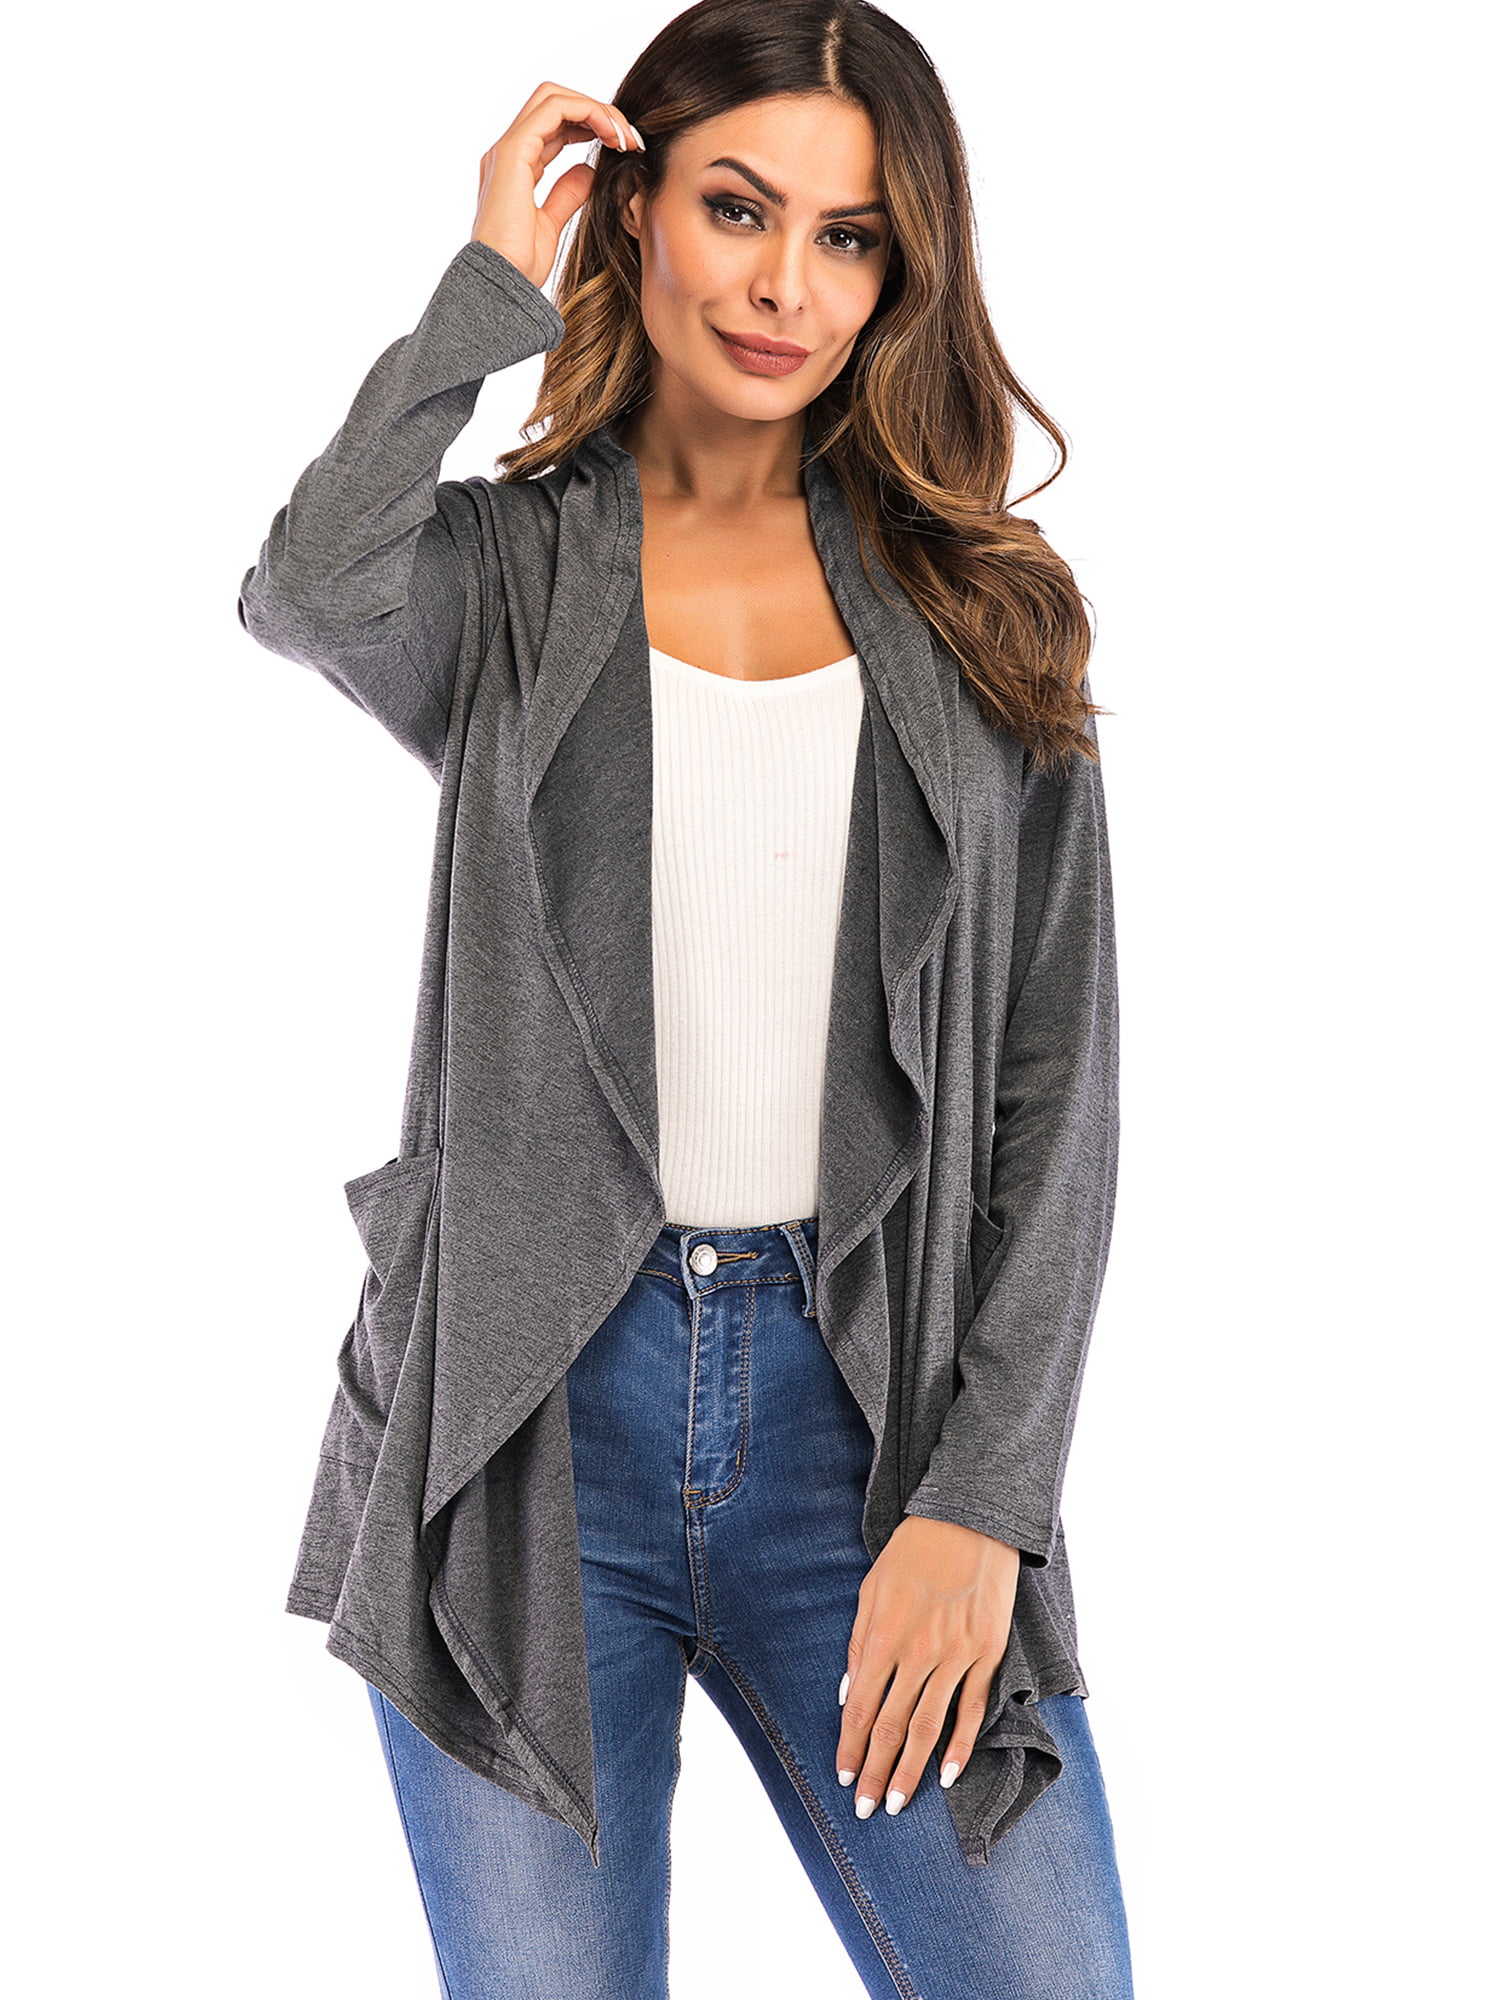 SAYFUT Womens Ruffle Front Cardigan Long Sleeve Solid Open Front